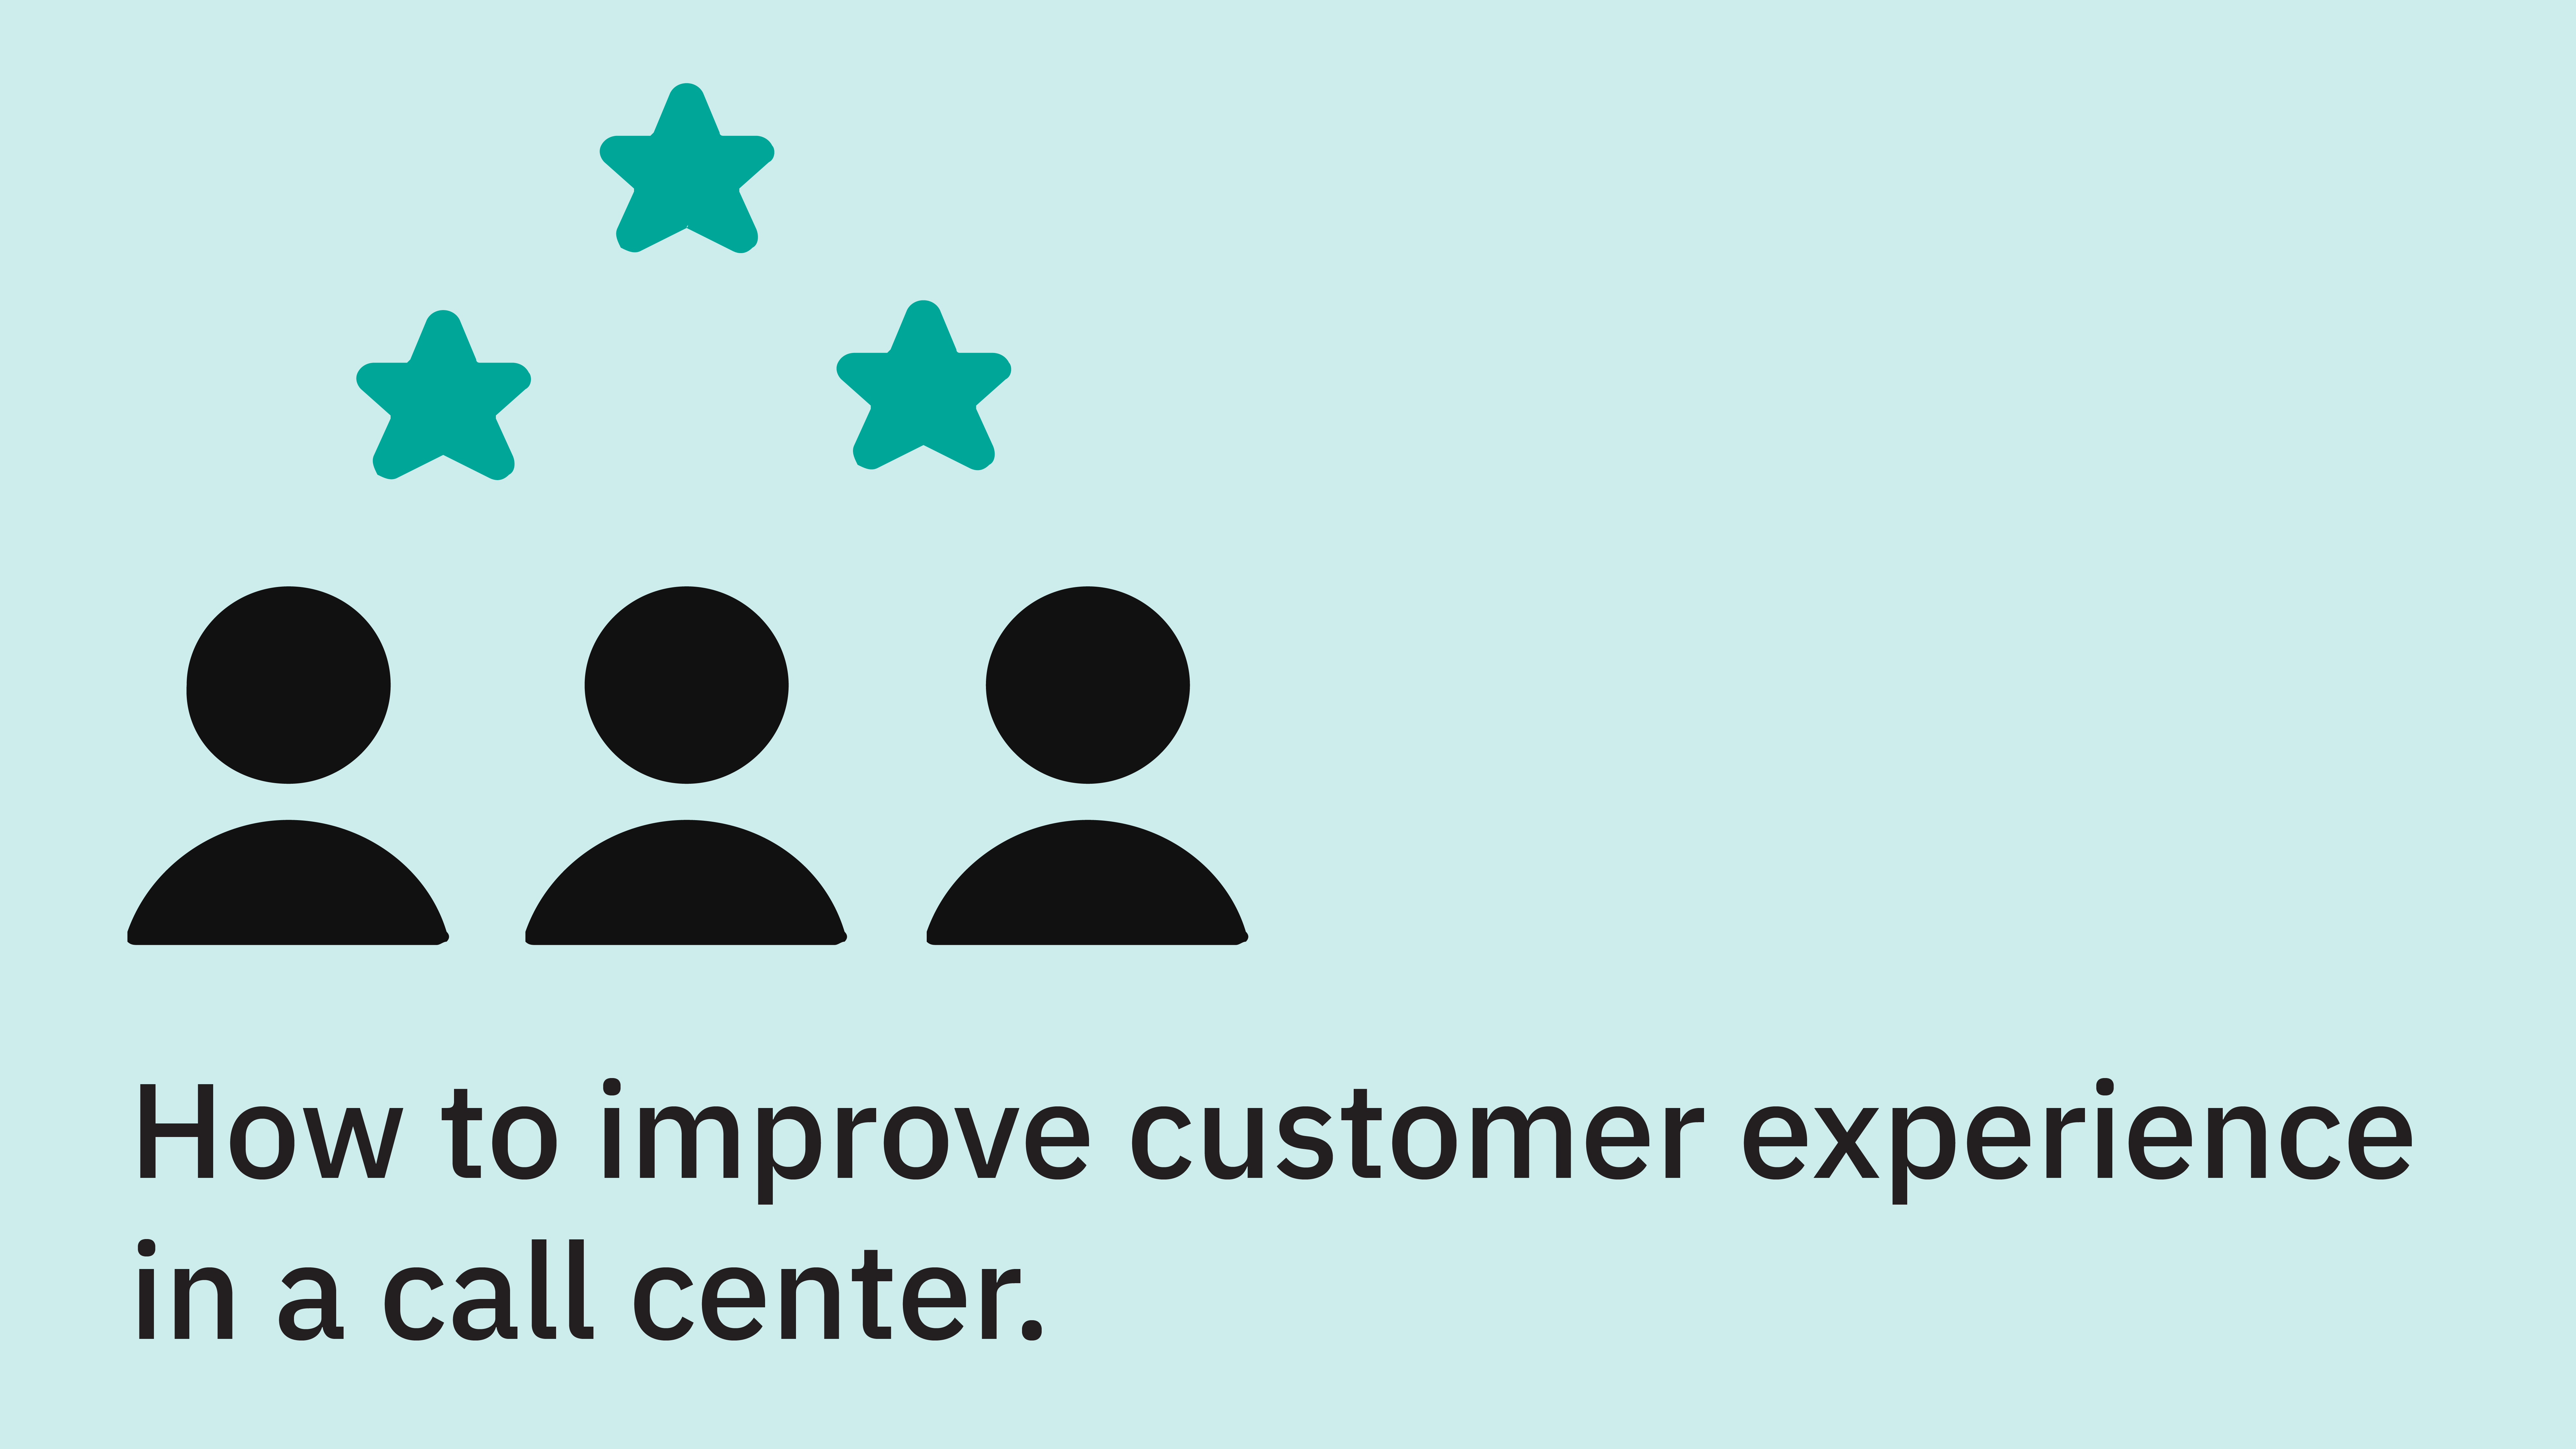 How to improve customer experience in a call center